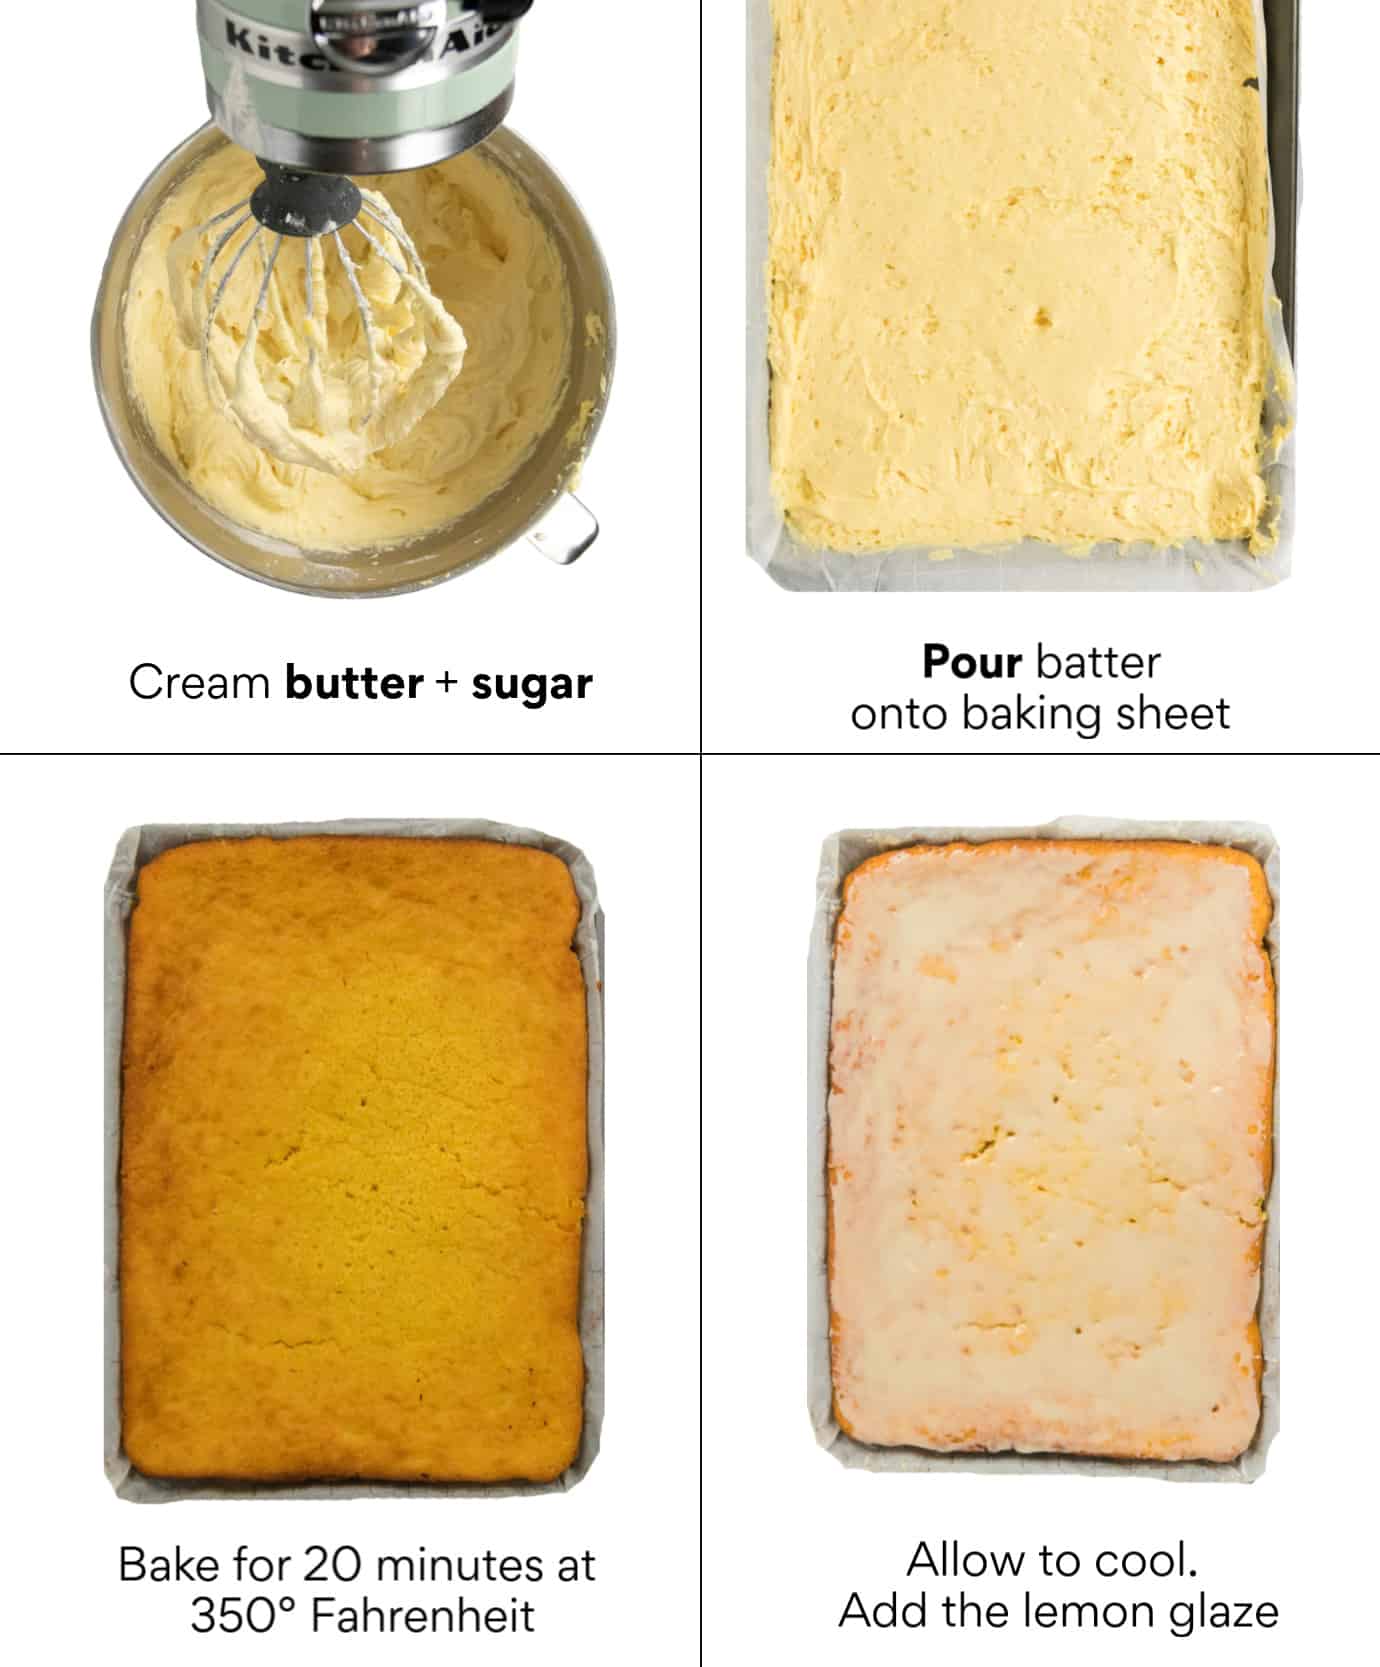 Steps showing how to pour the batter, bake and glaze the lemon pound cake